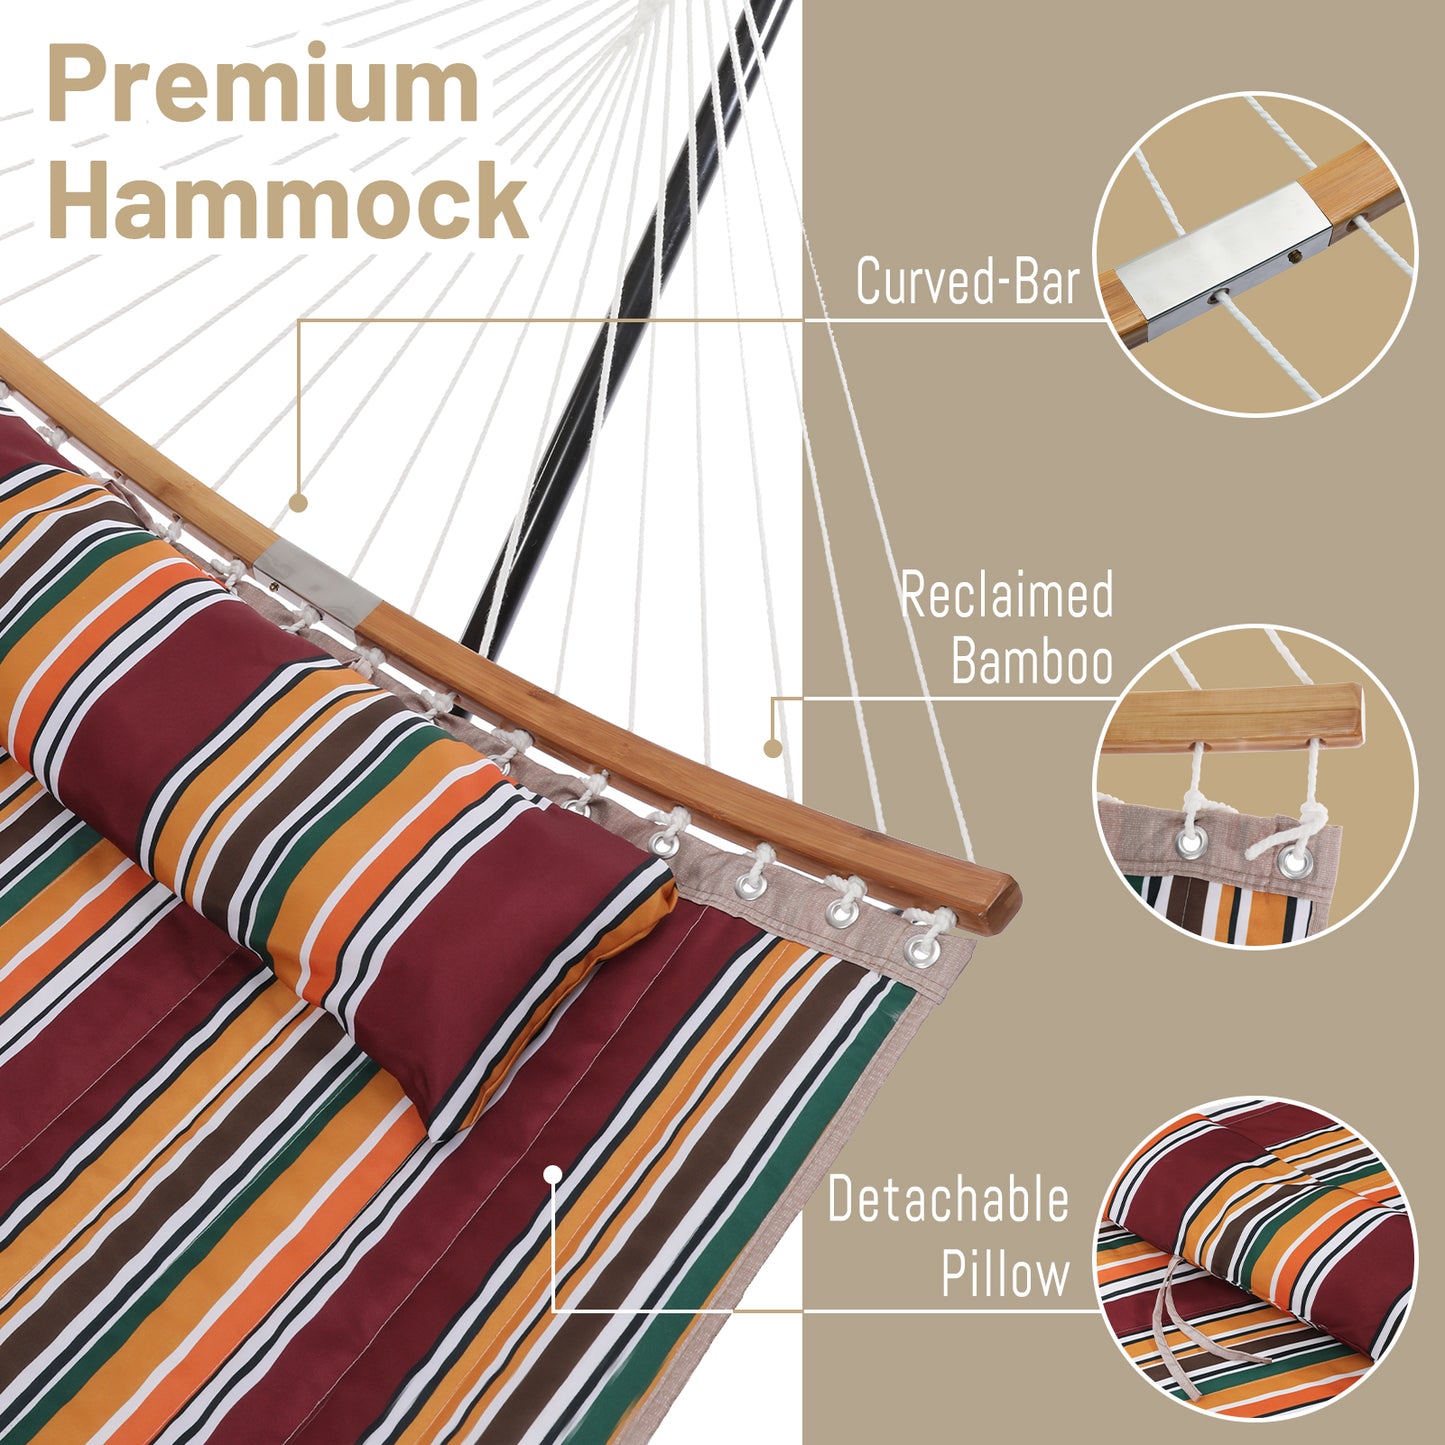 SUPERJARE Hammock with Stand - Maple-Leaf Red, 3702W